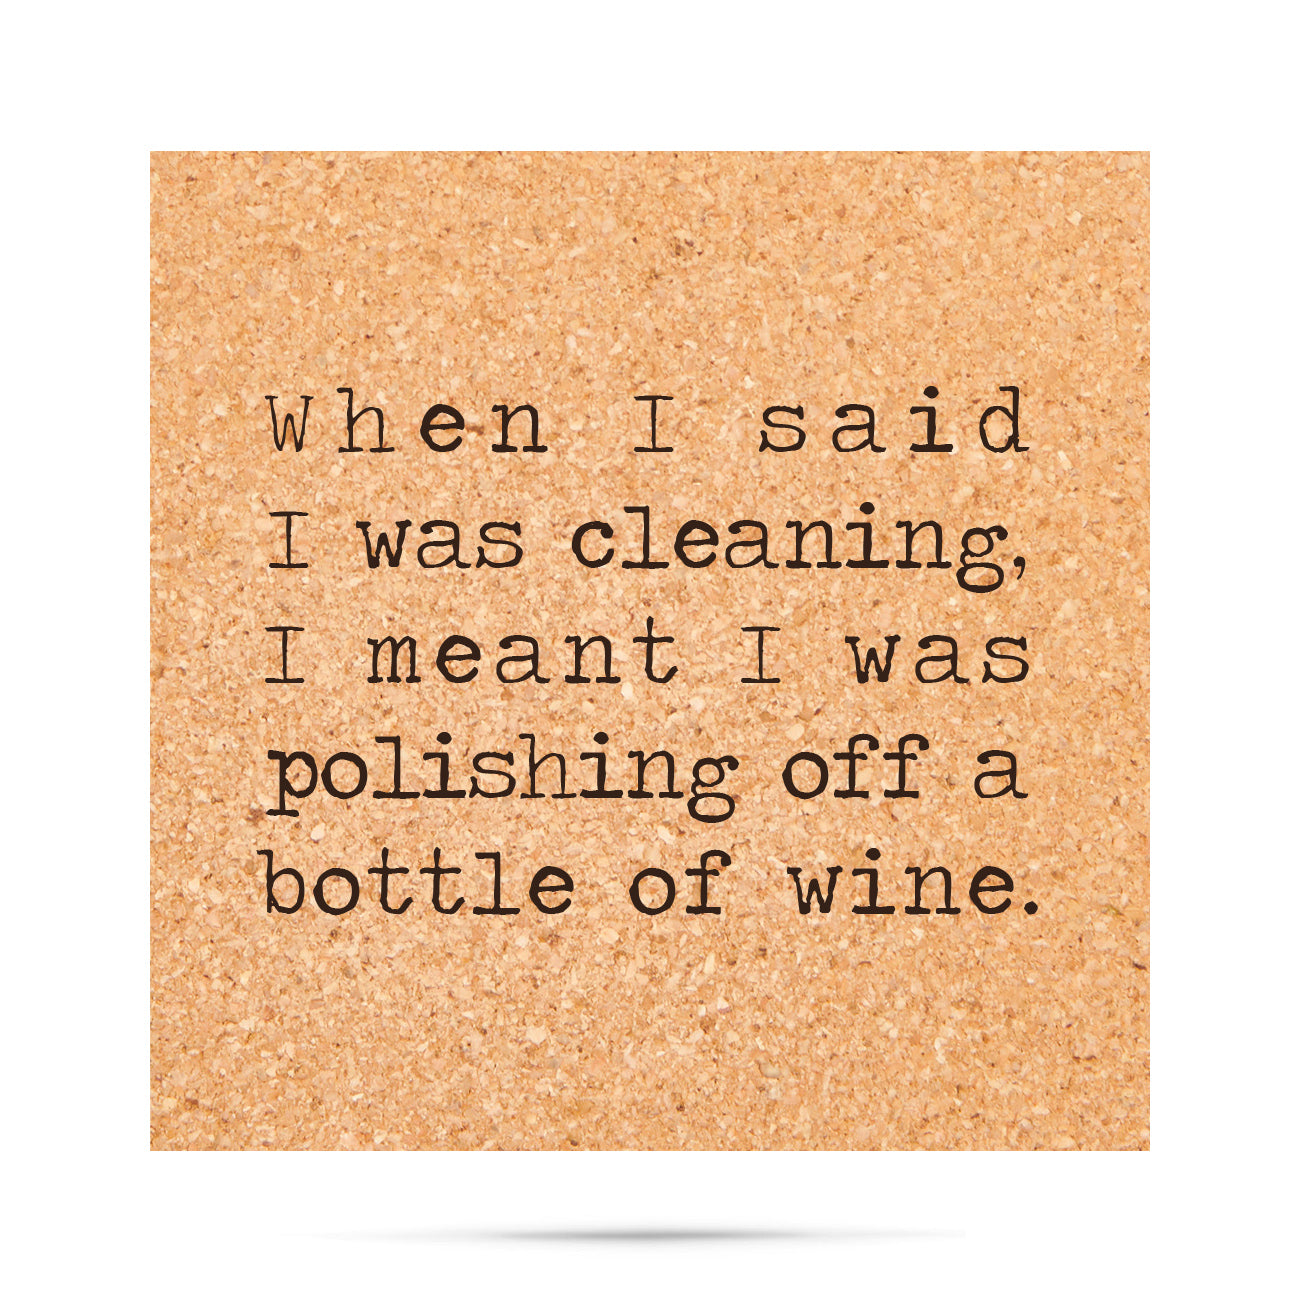 When I said I was cleaning, I meant I was polishing off a bottle of wine funny Cork Coaster